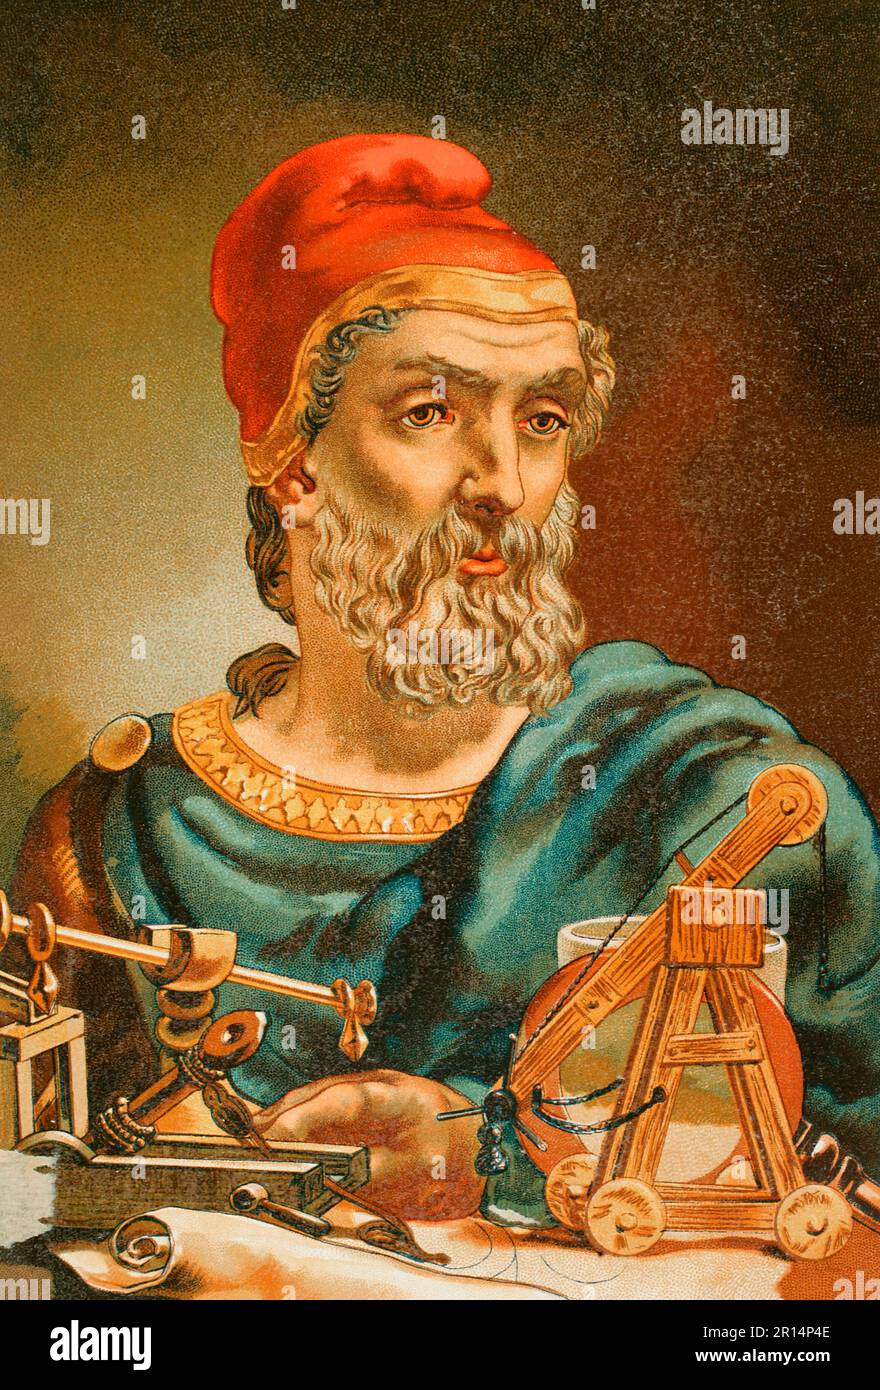 Archimedes (287 BC - 212 BC). Ancient Greek mathematician and inventor. Portrait. Chromolithography. 'Historia Universal' by César Cantú. Volume III, 1882. Stock Photo